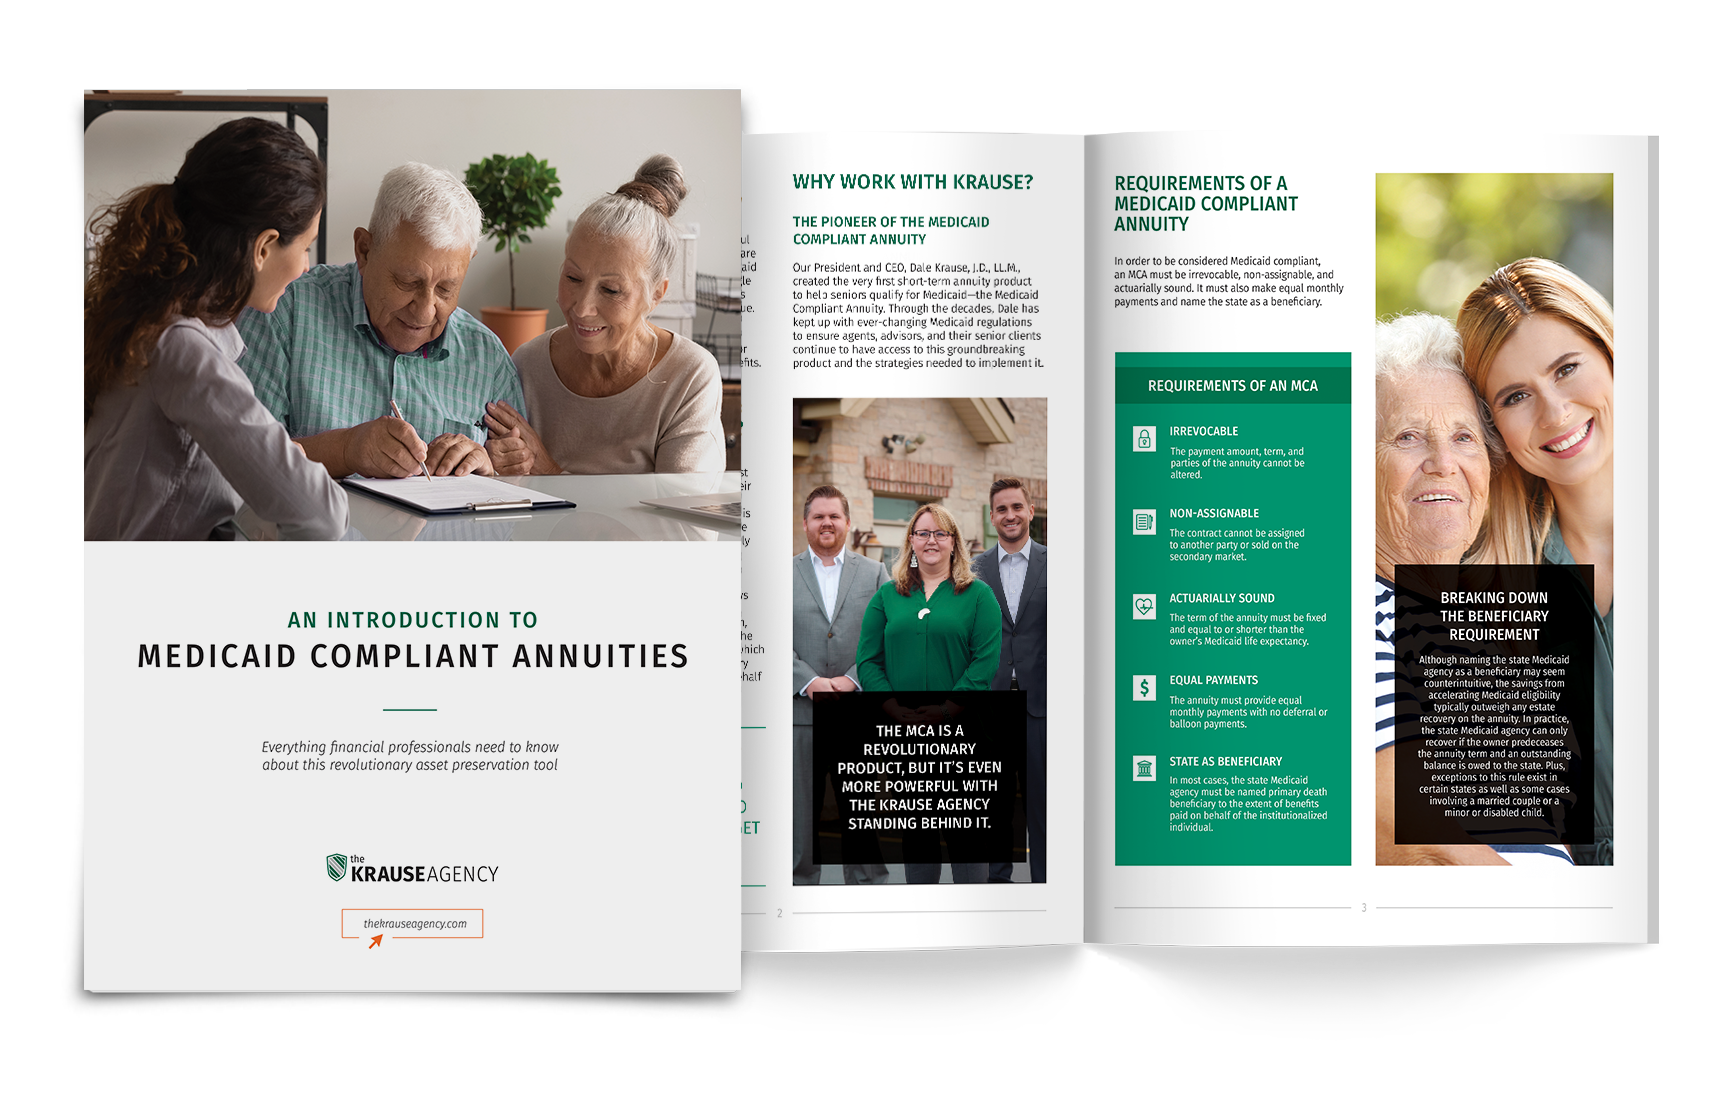 An Introduction to Medicaid Compliant Annuities